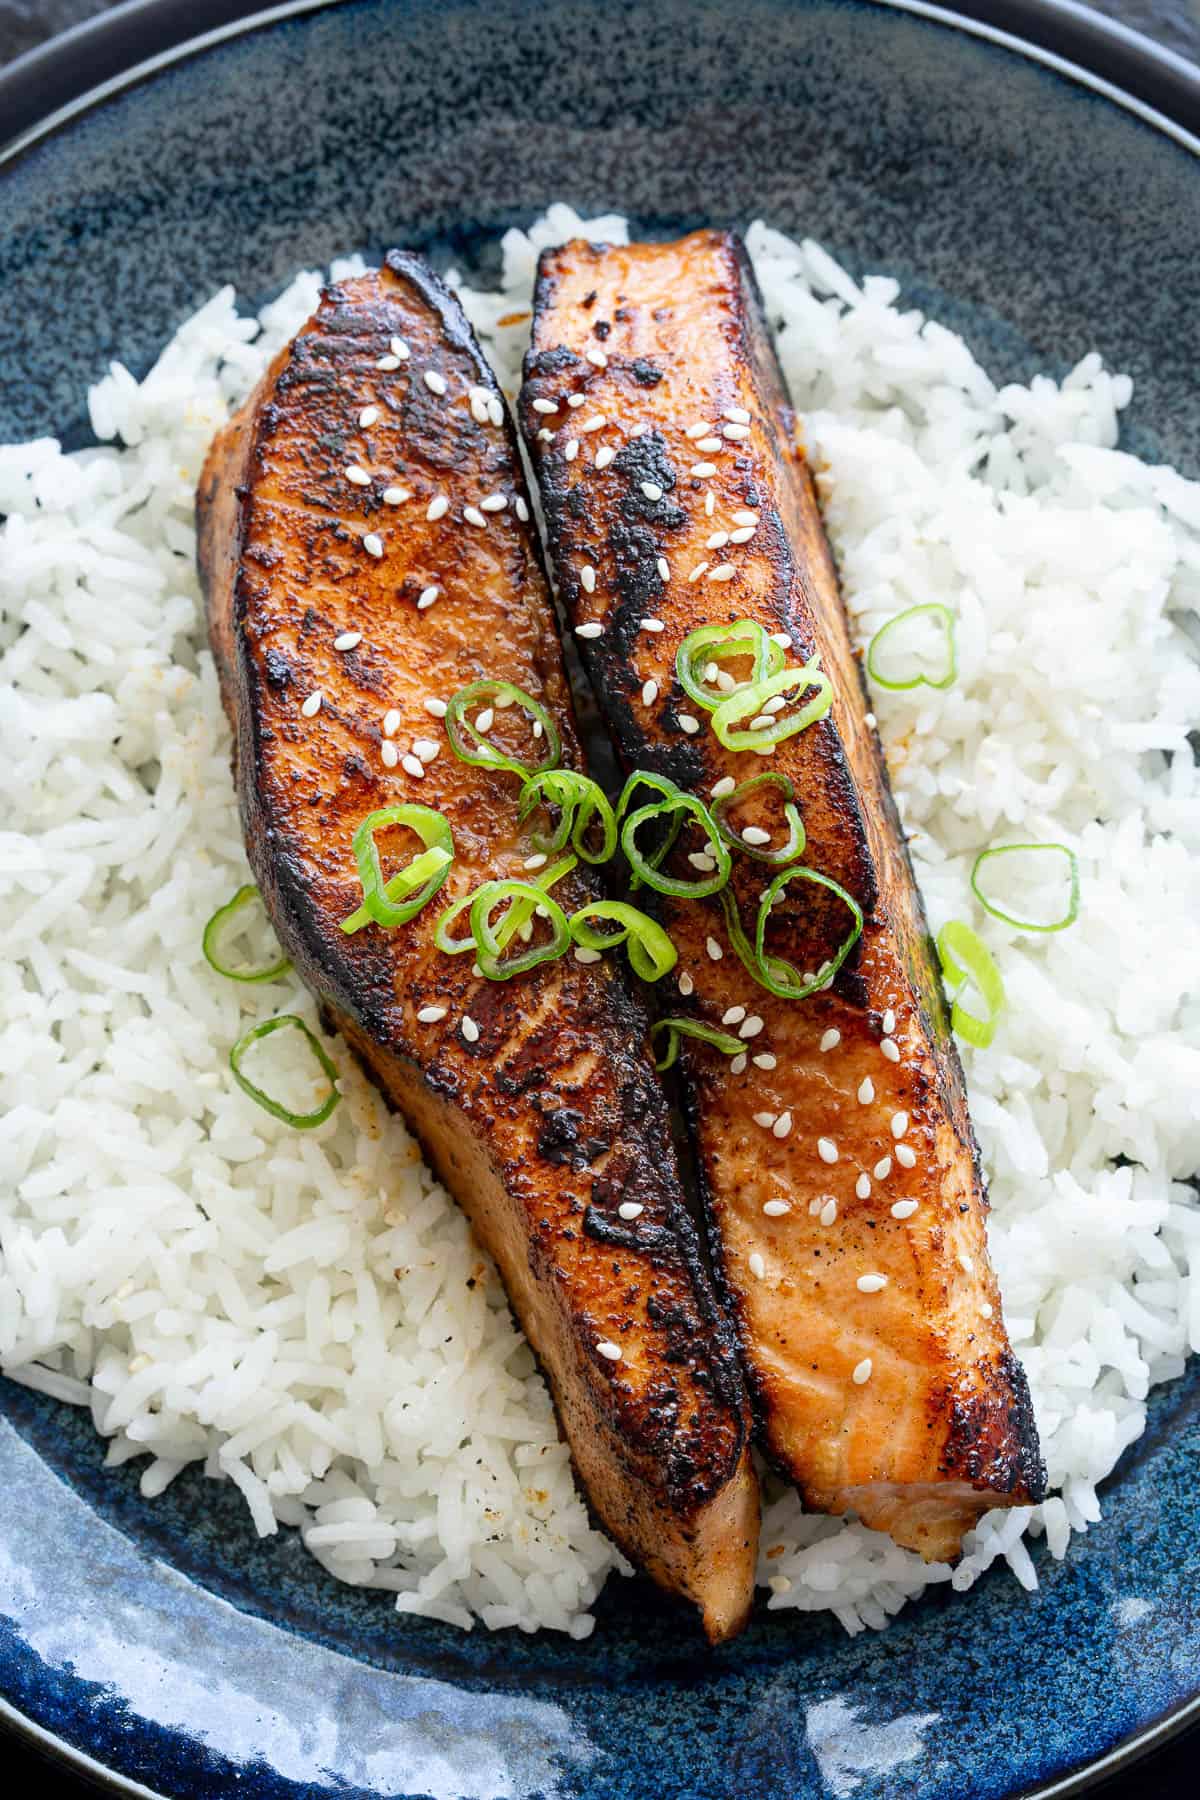 Two salmon steaks that show off the miso glaze and charred edges from cooking.